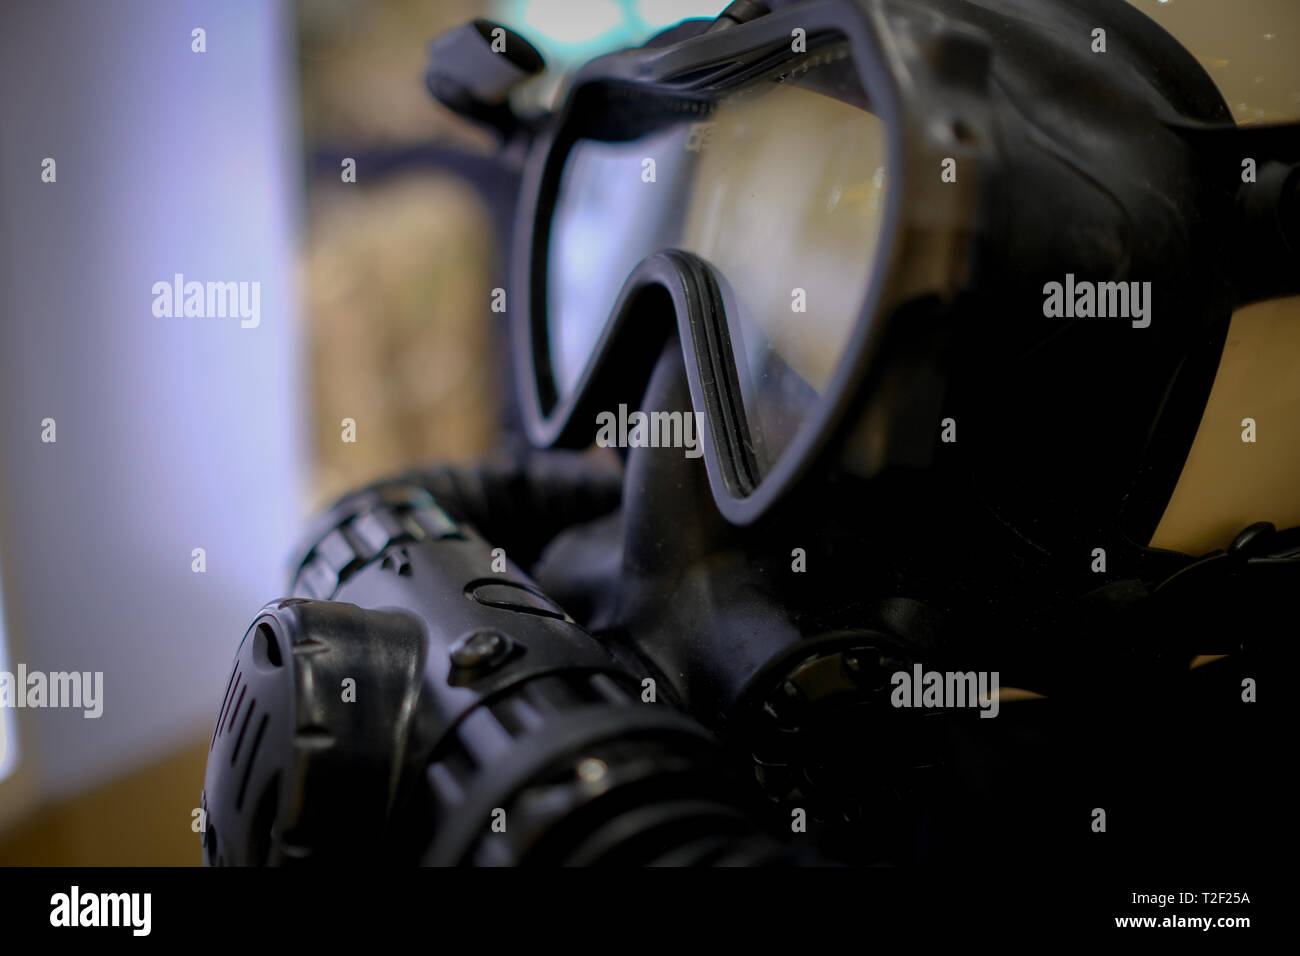 Close up of a Gas mask Stock Photo